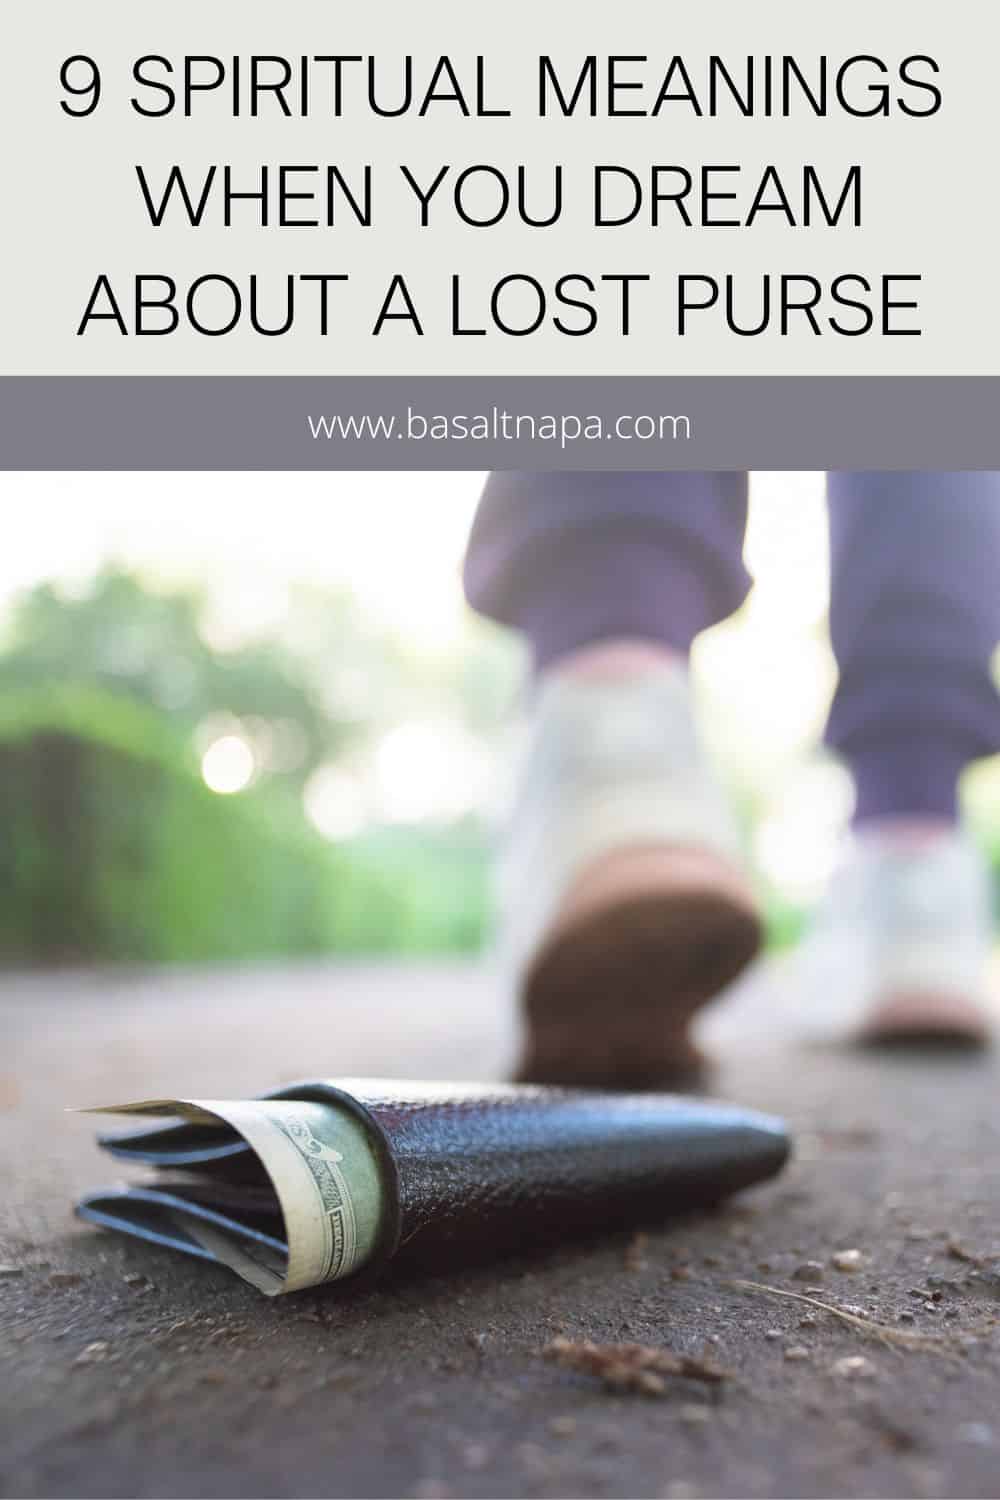 9 Spiritual Meanings When You Dream About A Lost Purse